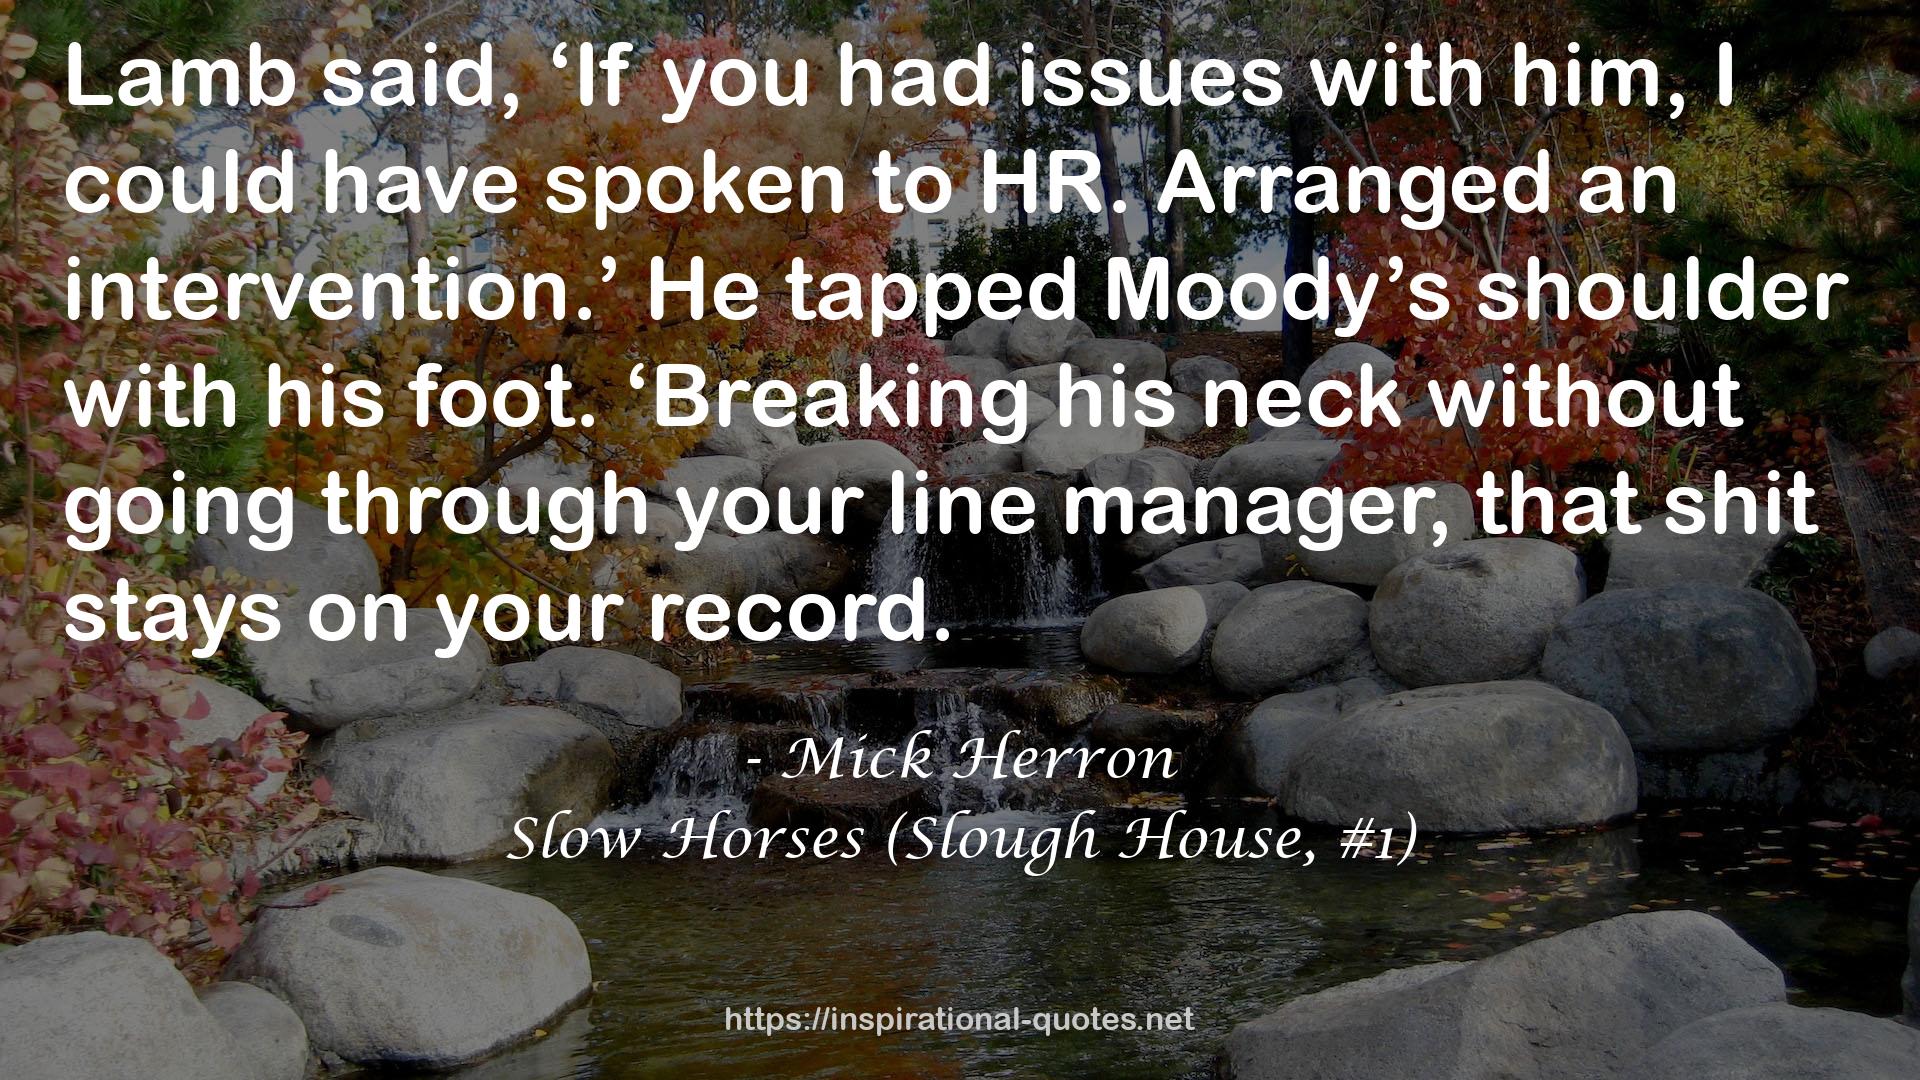 Slow Horses (Slough House, #1) QUOTES